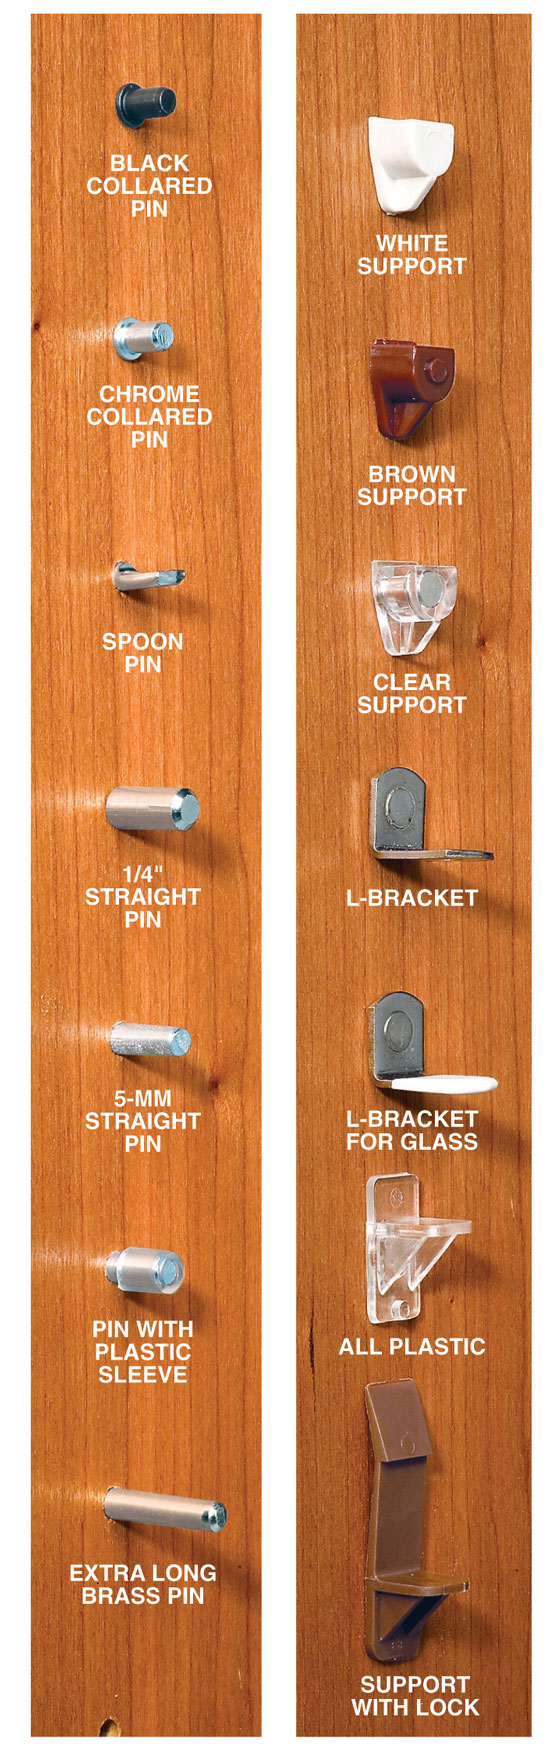 AW Extra 1/3/13 – Tips for Installing Shelf Supports ...